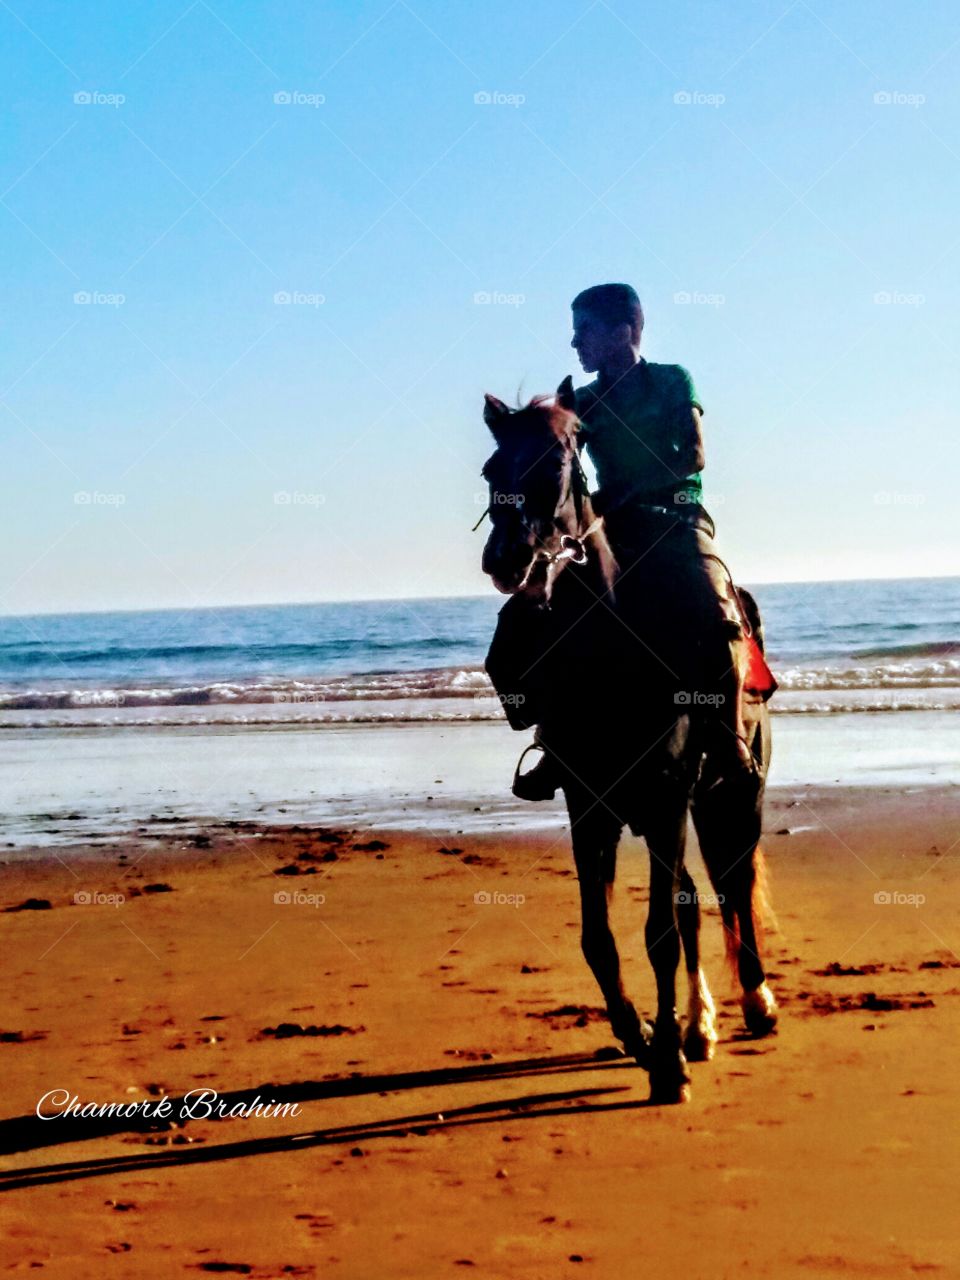 I took the photo of this boy riding this beautiful horse on a beach.Really ,it is soo amazing